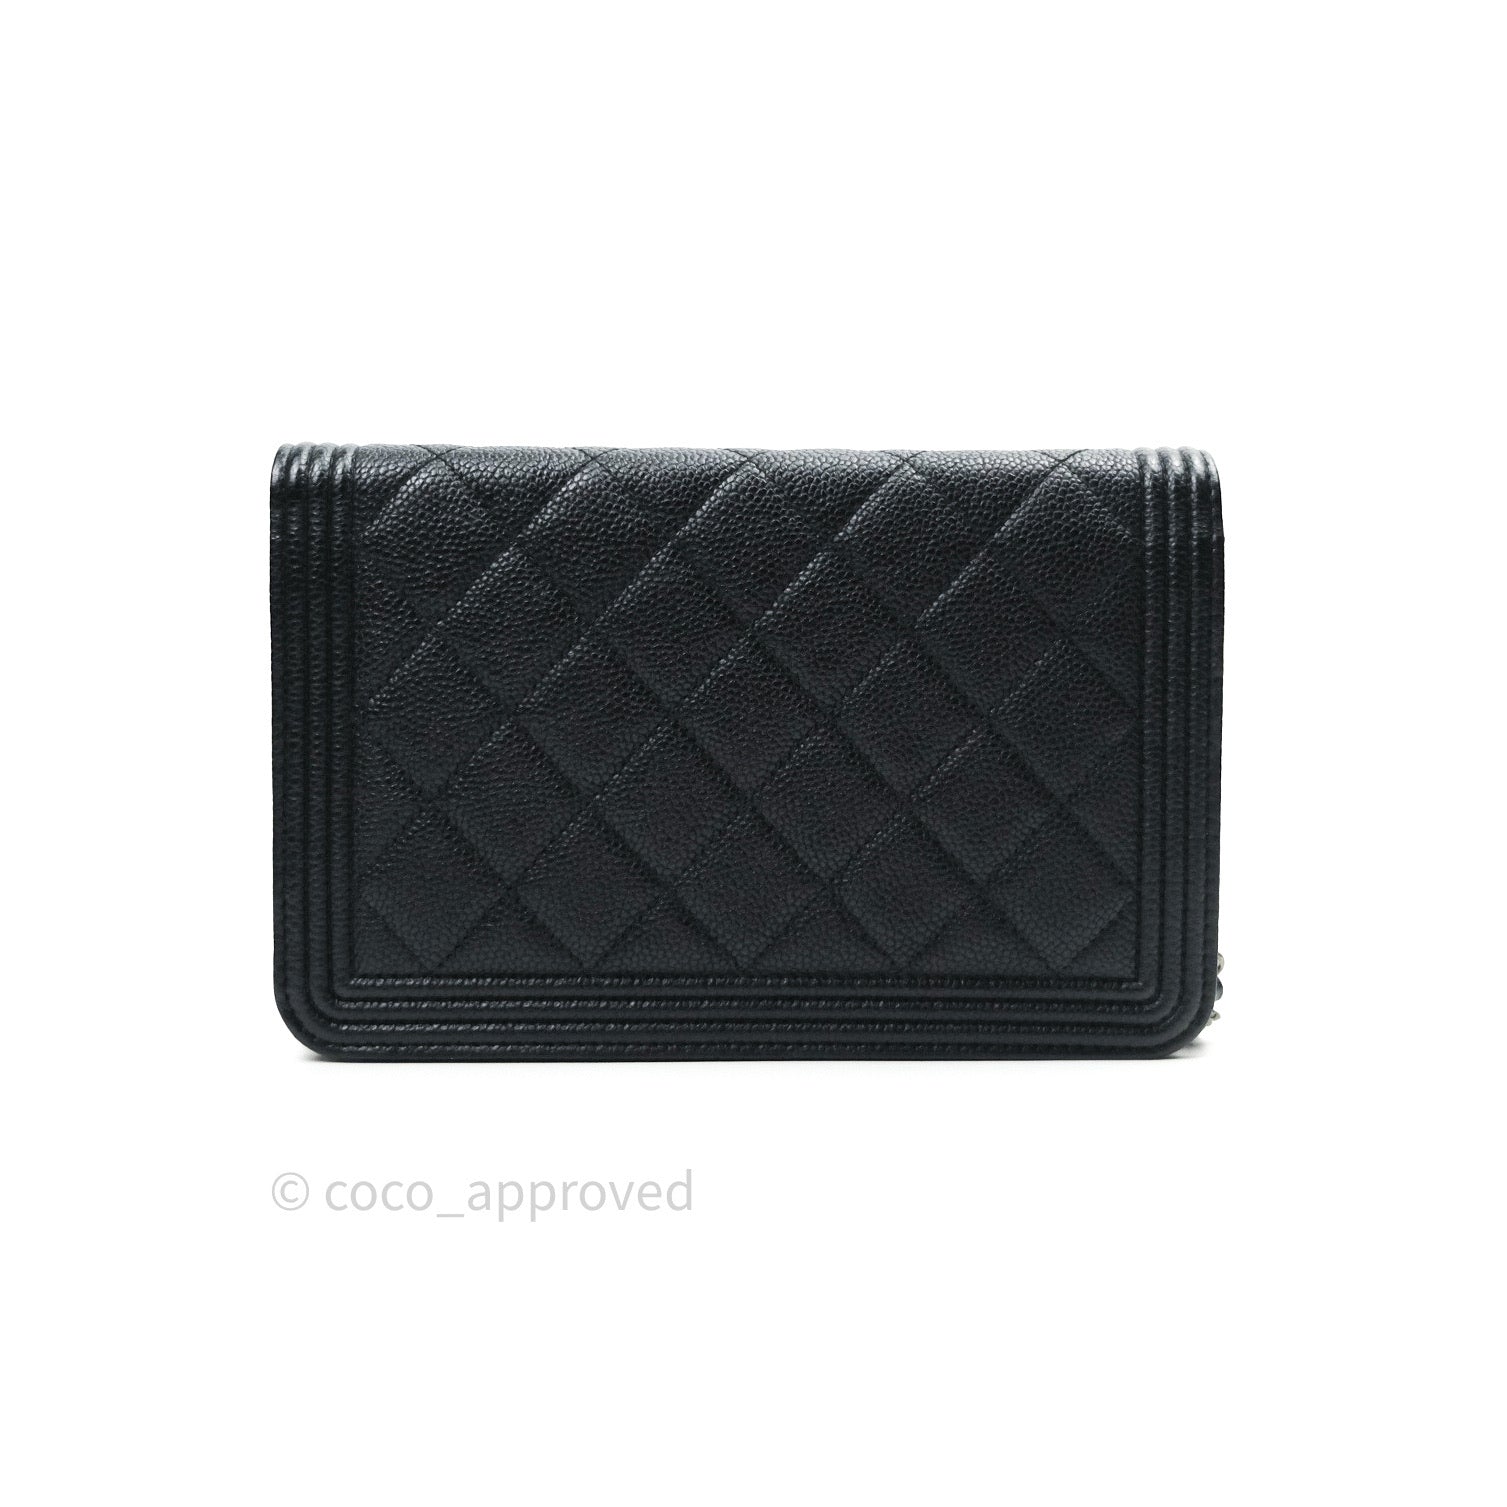 CHANEL, Bags, Chanel Boy Checkbook Wallet Black With Ruthenium